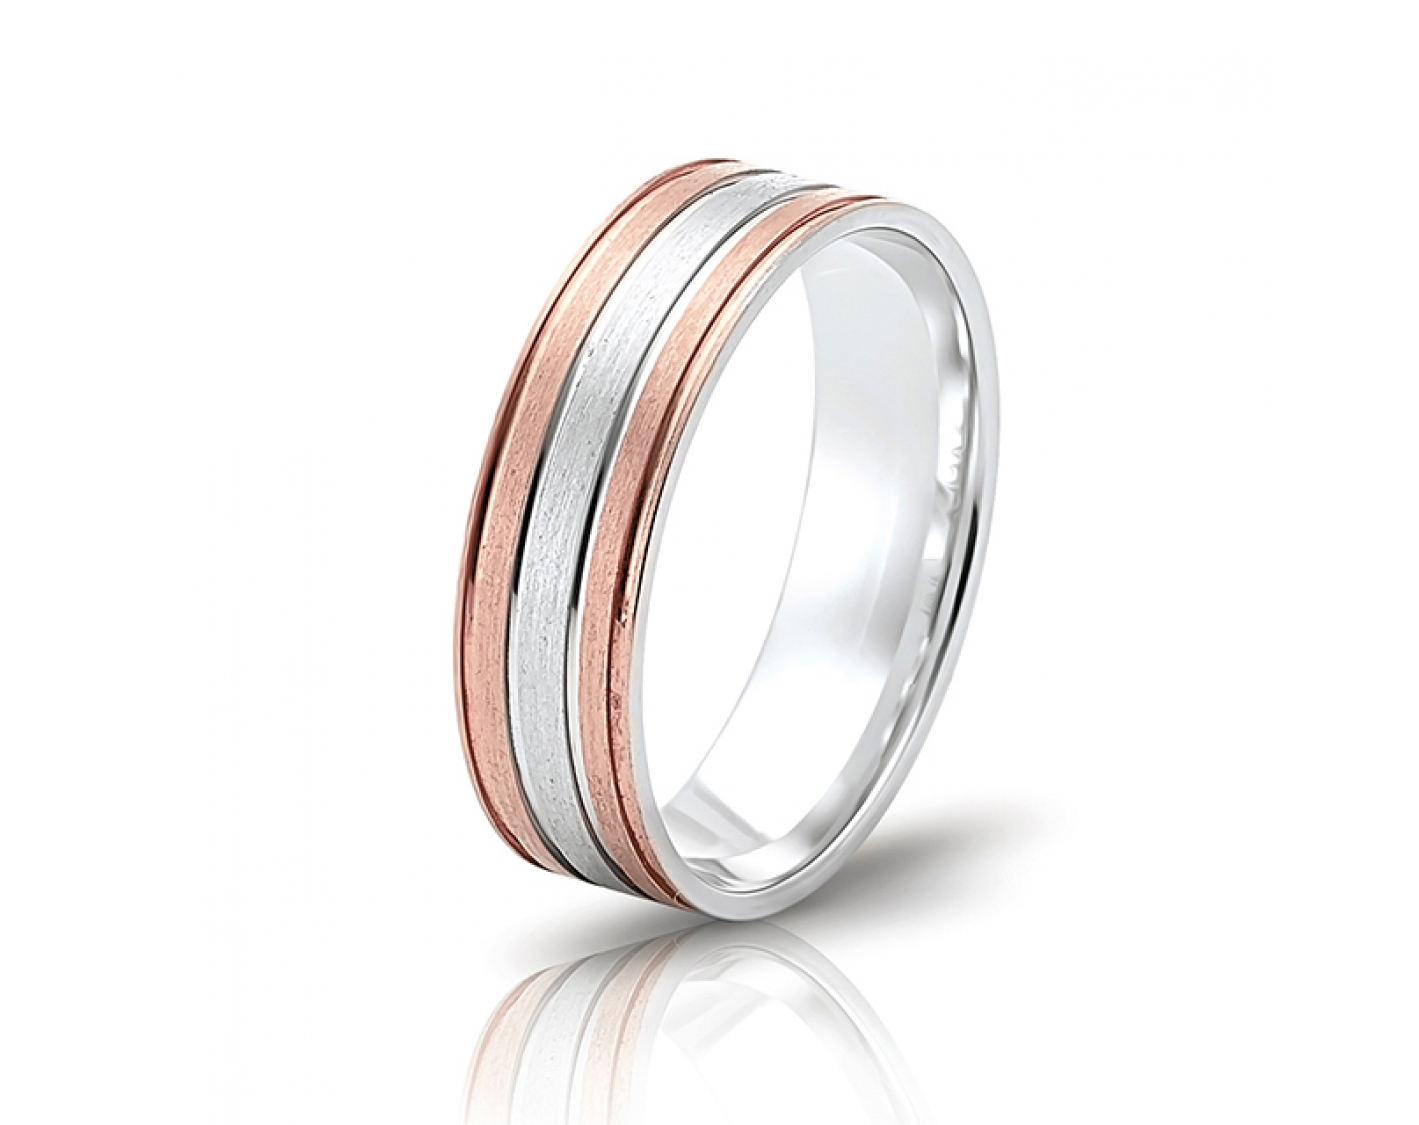 dual-tone 6mm two-toned* wedding band Photos & images